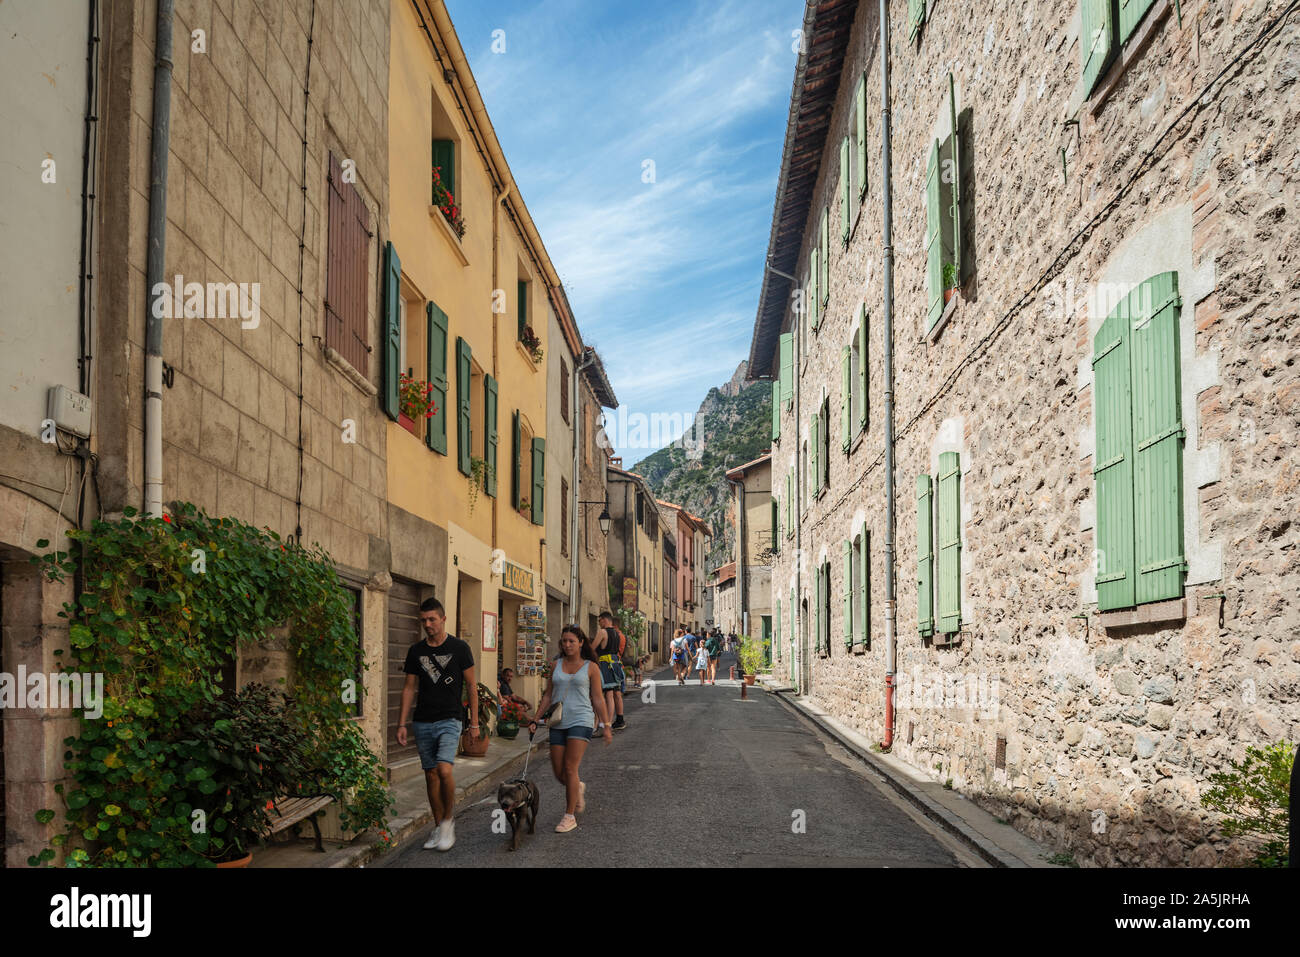 People walking in old streets of Villefranche-De-Conflent town, Pyrenees Orientales, French Catalonia, France Stock Photo